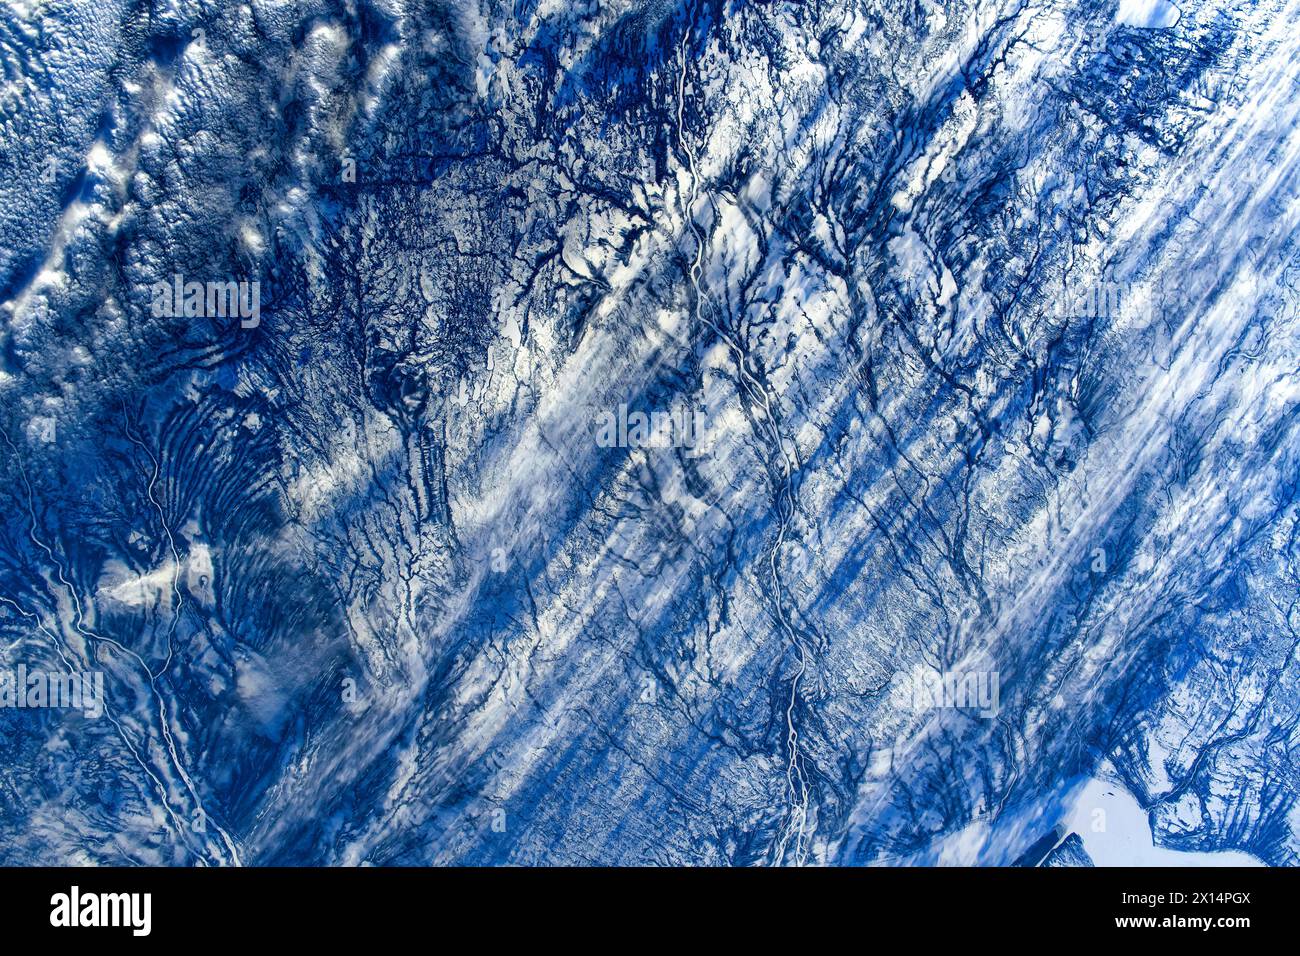 Winter in the Canadian province of Quebec. Digital enhancement of an image by NASA Stock Photo